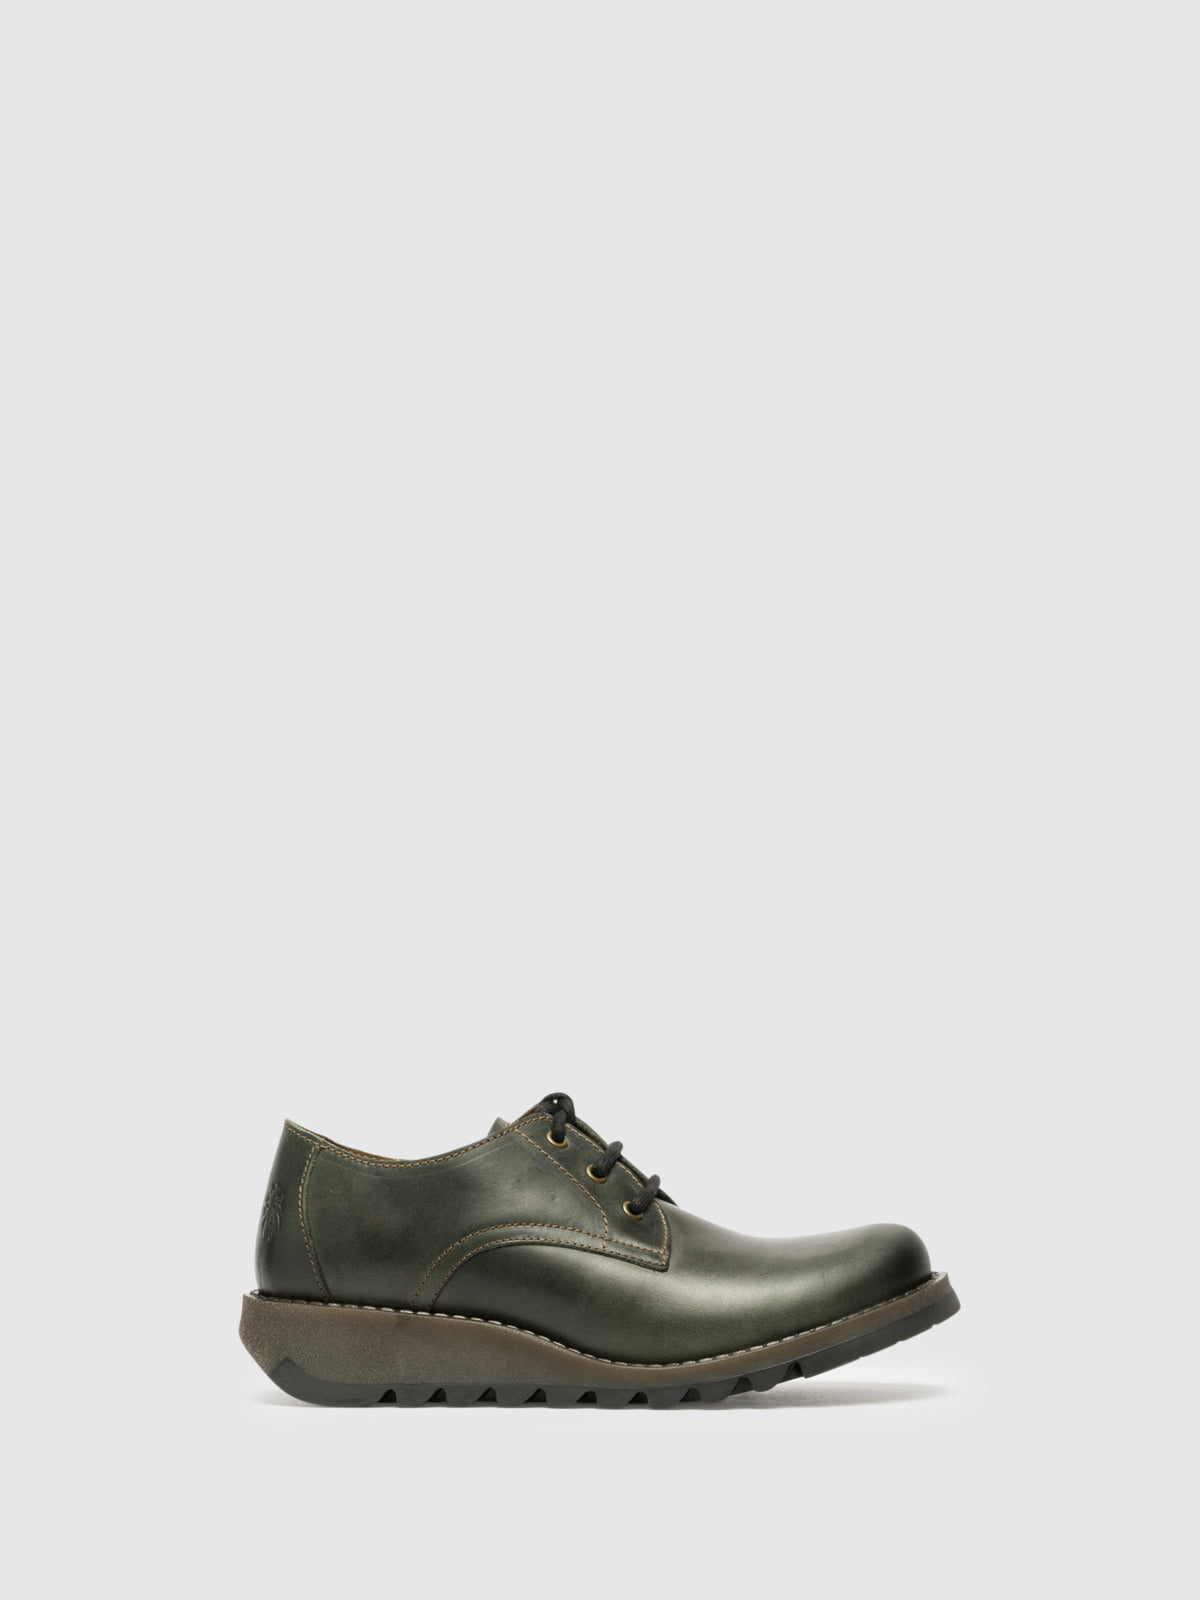 Fly London Green Derby Shoes